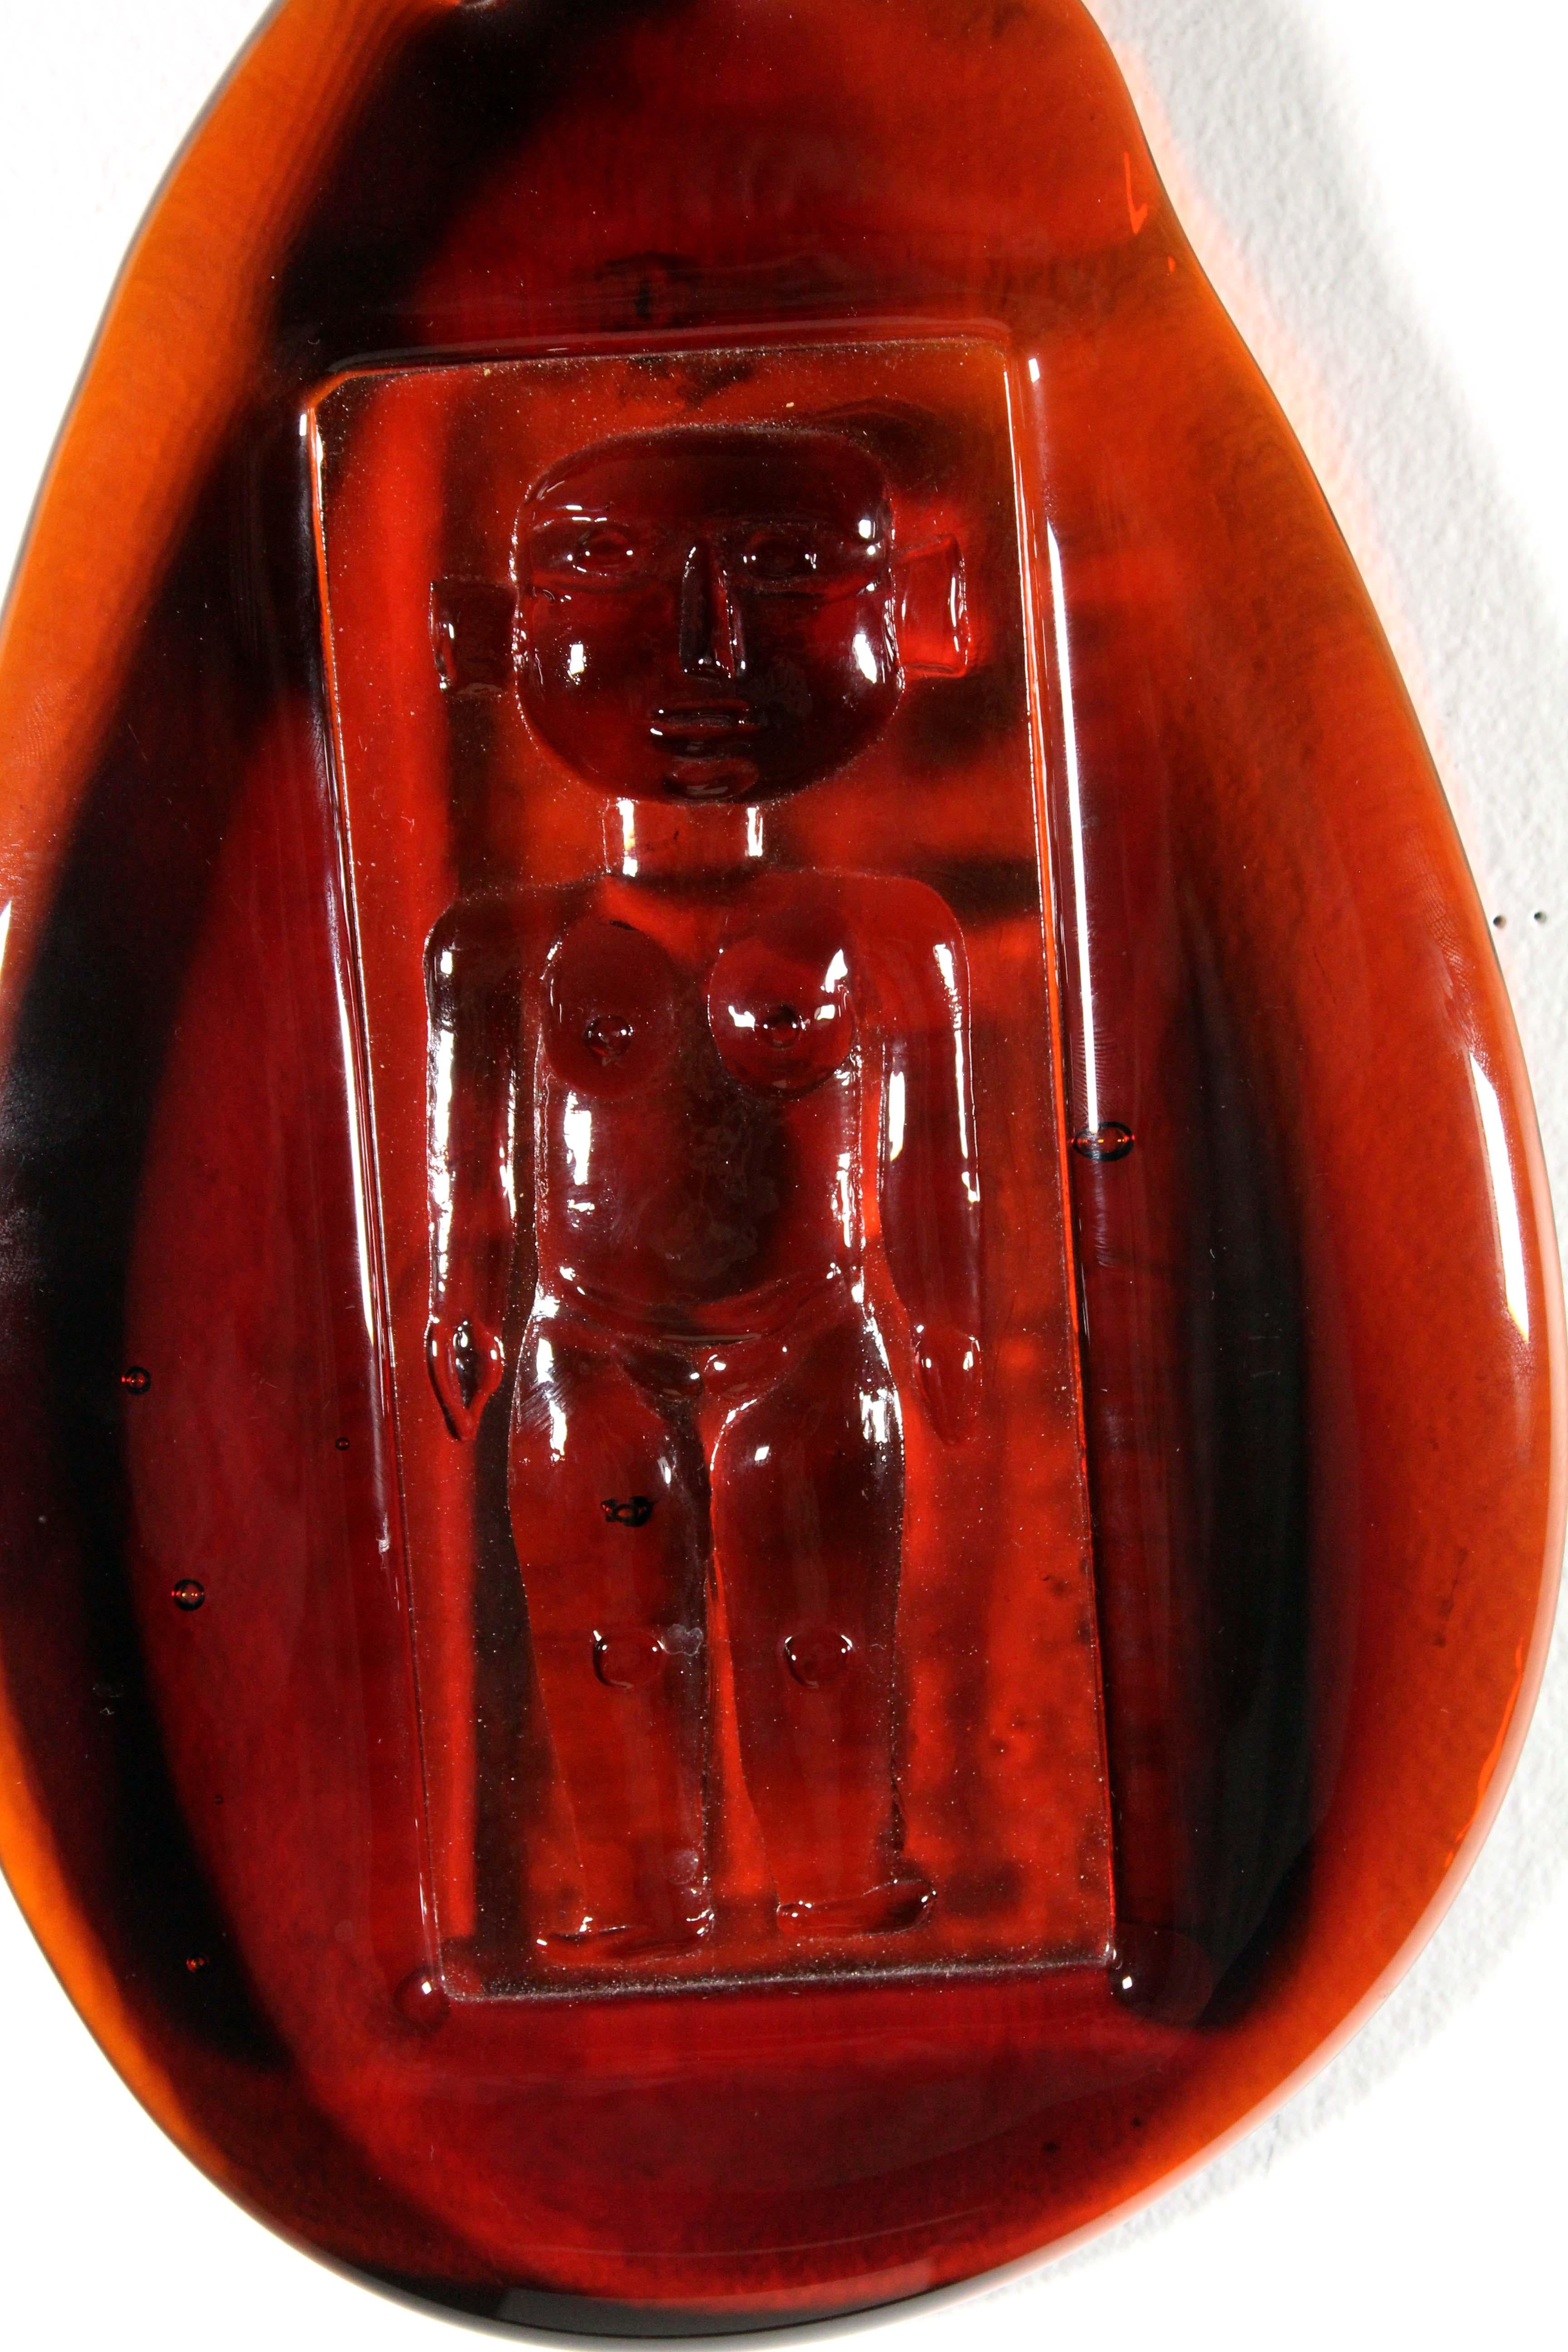 An iconic Mid-Century Modern orange glass people sculpture by Swedish artist Erik Hoglund. Etched on bottom H 807. From a private collection. Dimensions: 10.25” x 6.25” W x .5” D. In very good vintage condition. Erik Hoglund (1932-1998) is known for